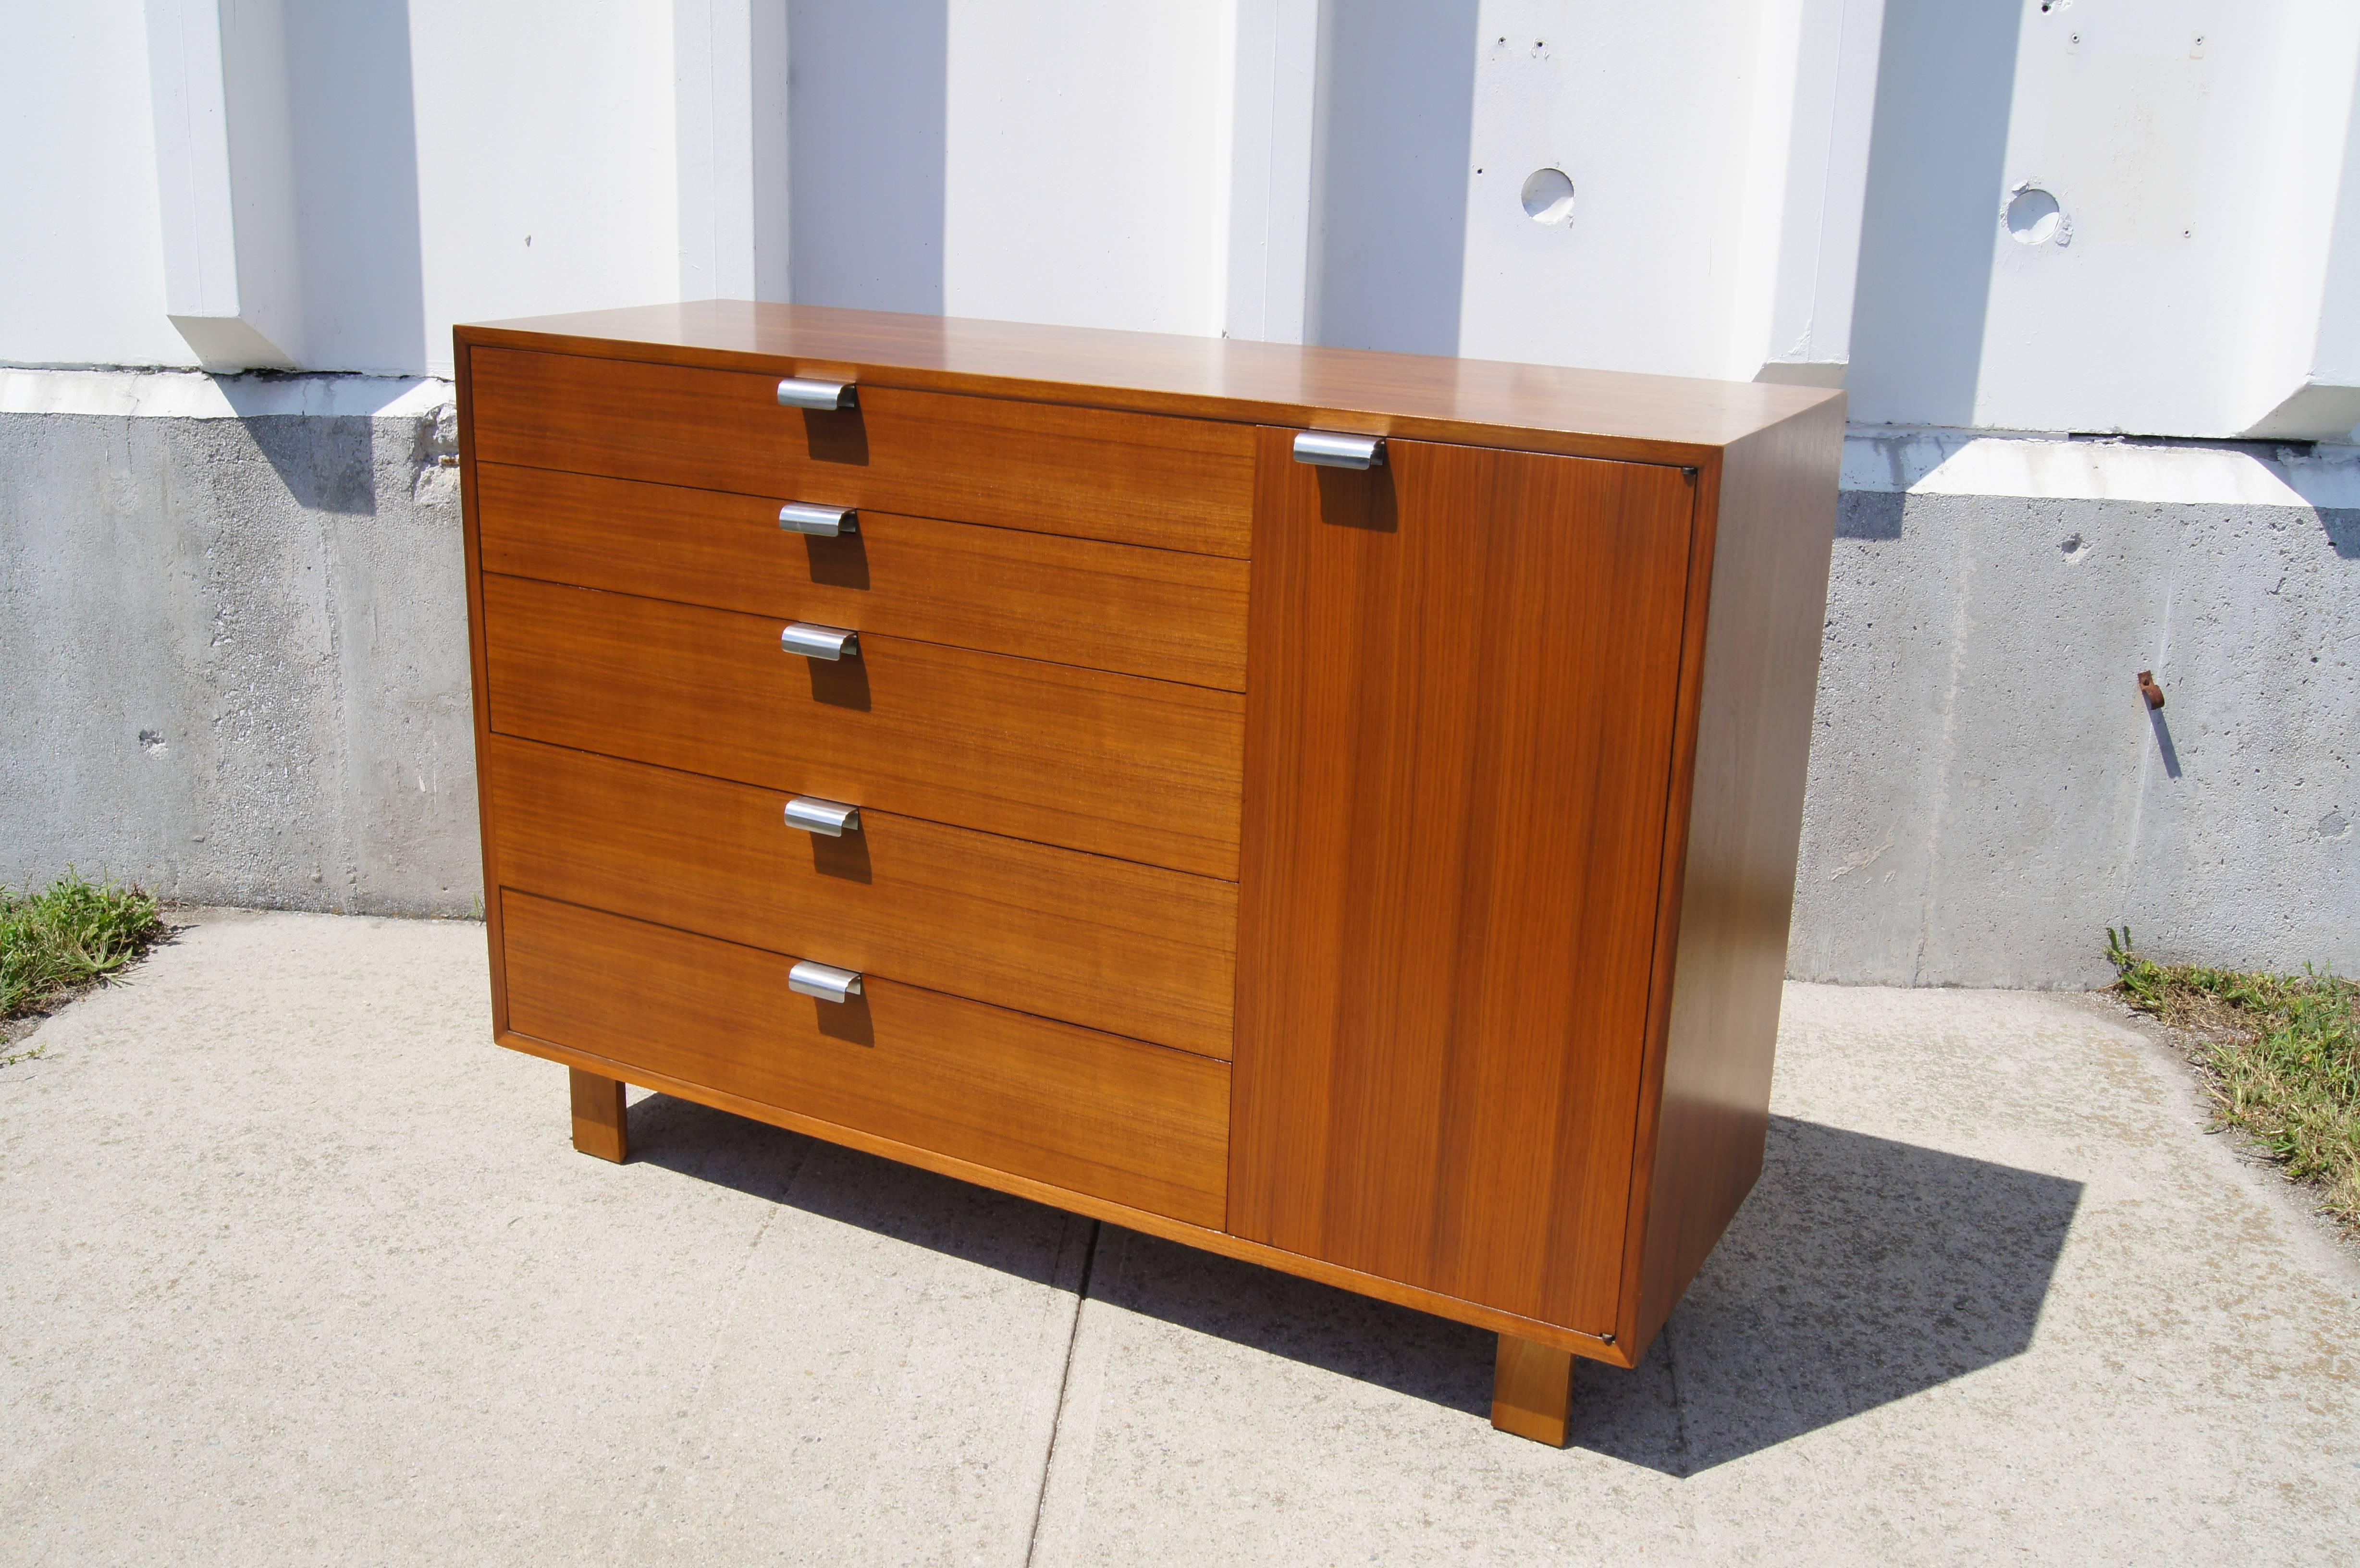 George Nelson designed this chest or cabinet, model #4621, as part of Herman Miller’s modular basic storage components. The warm walnut case features five drawers and a cabinet with two adjustable shelves — all set with chrome-plated J pulls.

A